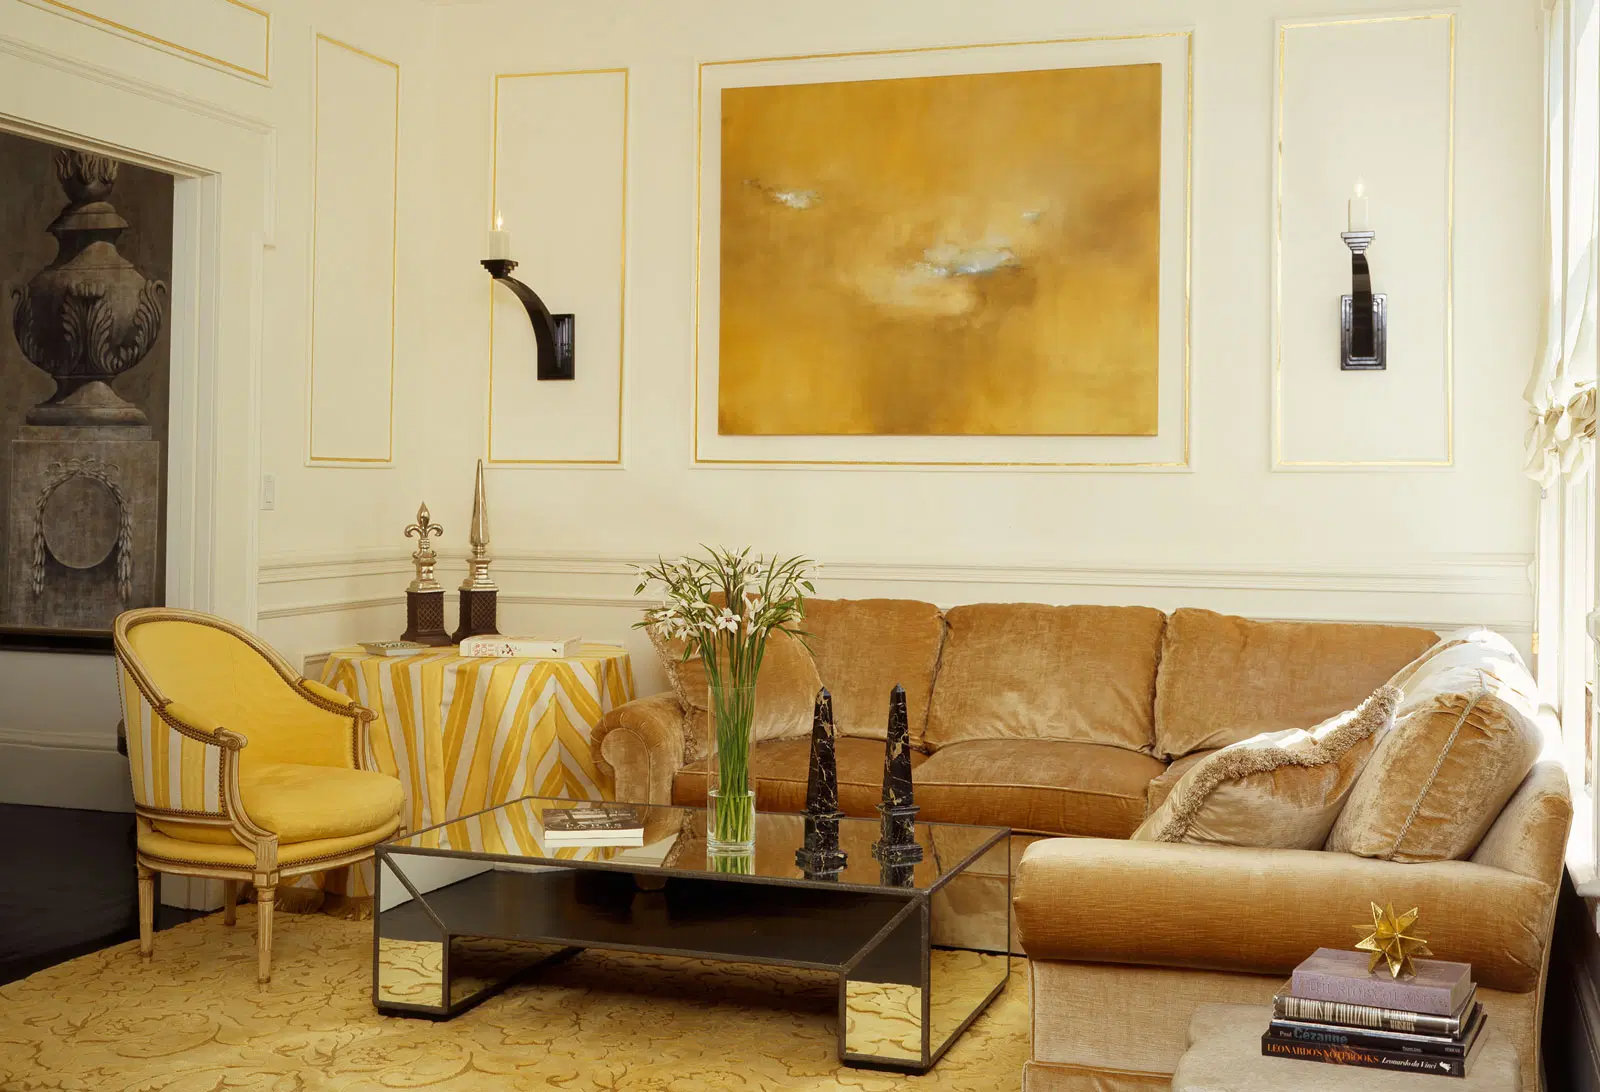 How to Decorate around a Gold Sofa